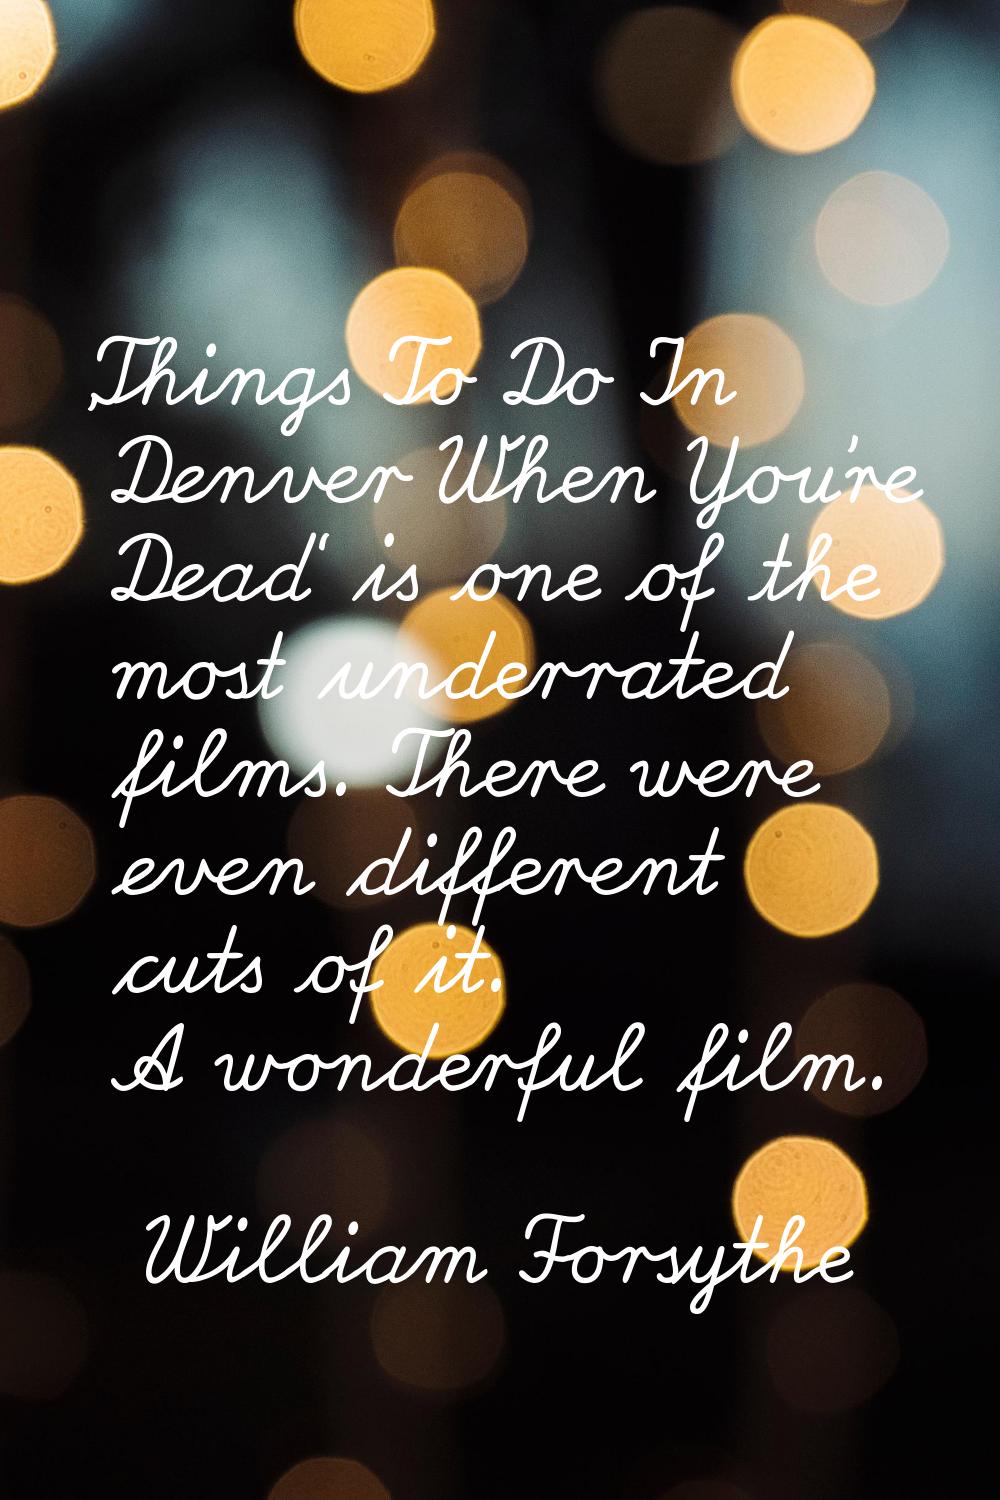 'Things To Do In Denver When You're Dead' is one of the most underrated films. There were even diff